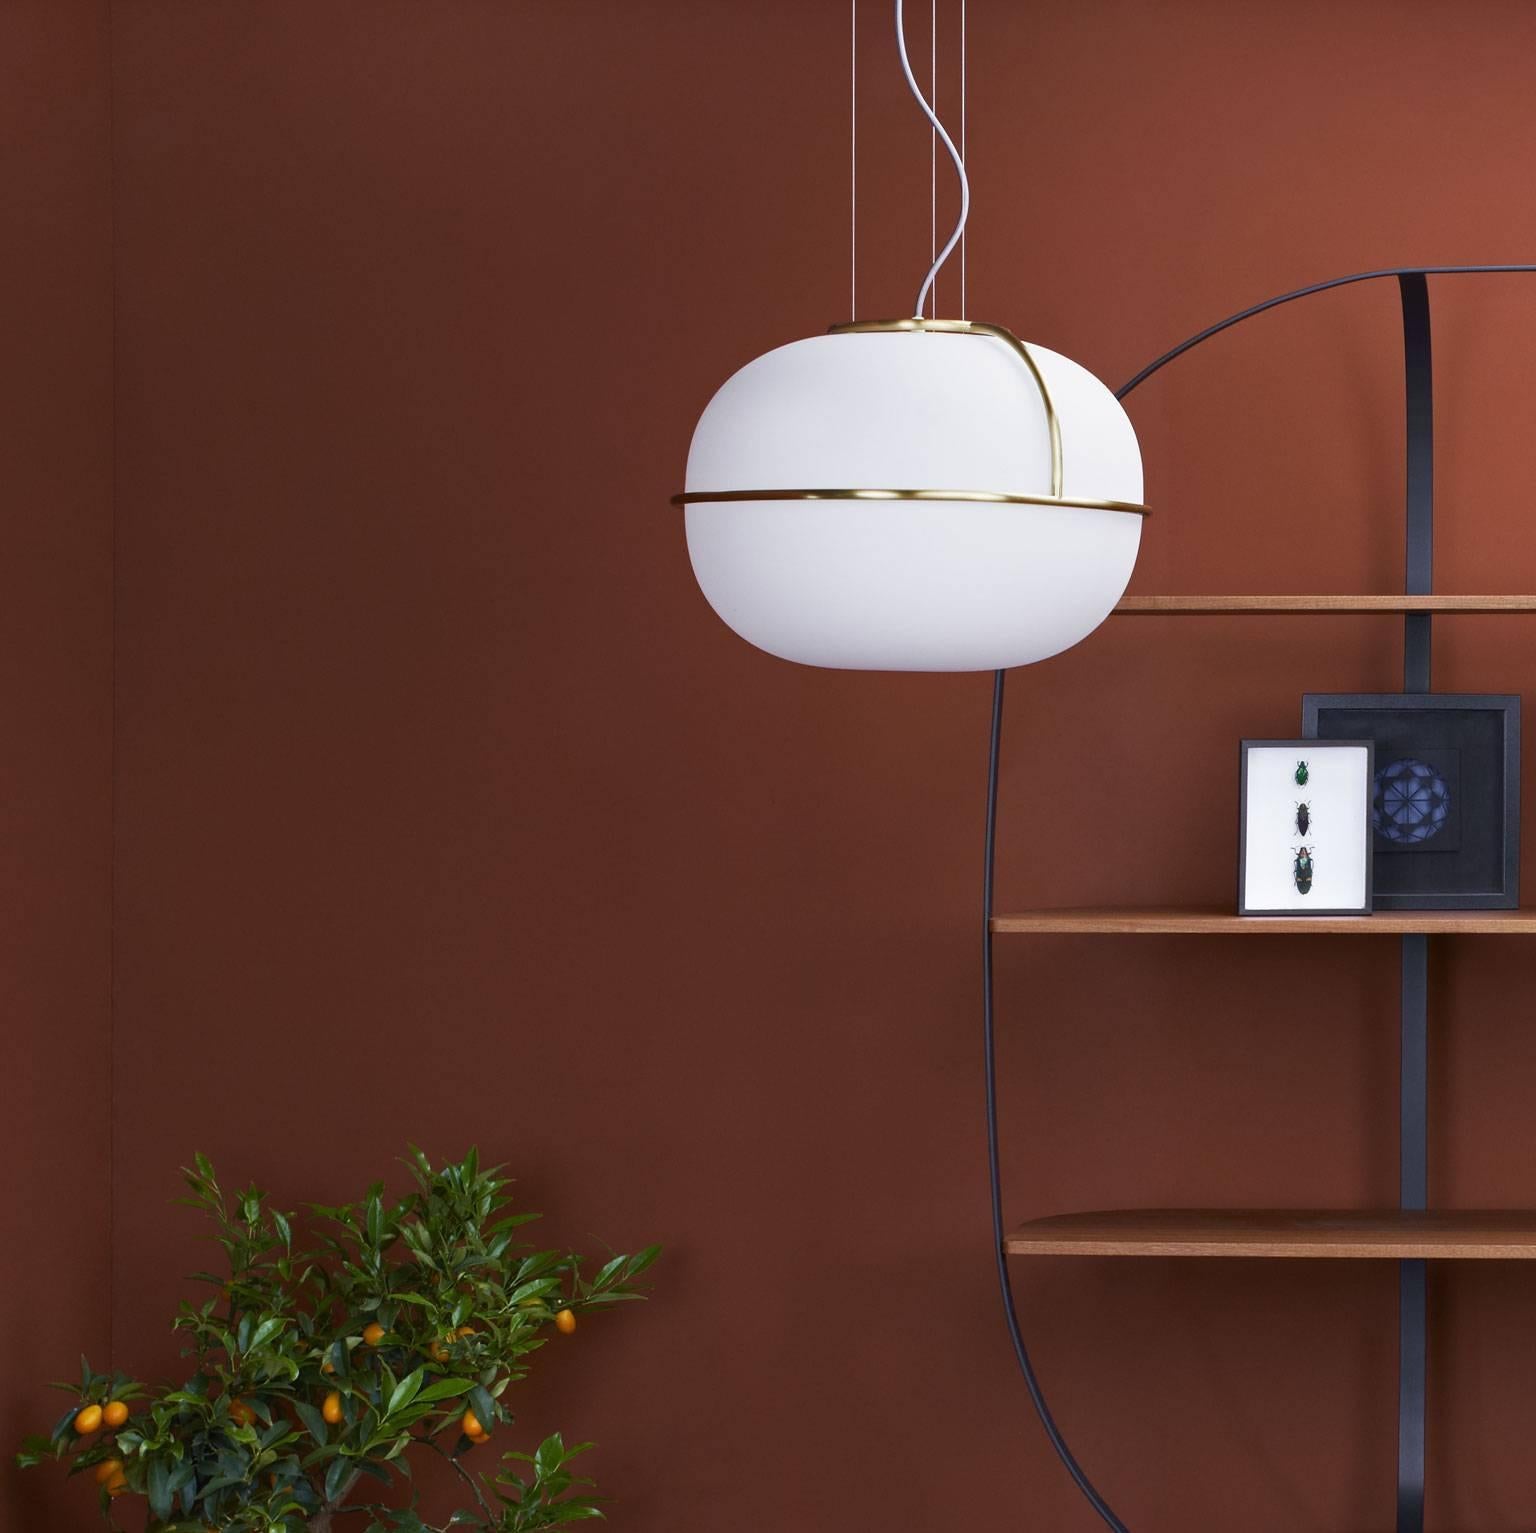 With a design inspired by the classical world of Parisian cafés, the L88 lamp is made of an opal matt white globe encircled by a light frame in brushed brass. Here showcased in the suspension version to diffuse a soft and enveloping light and